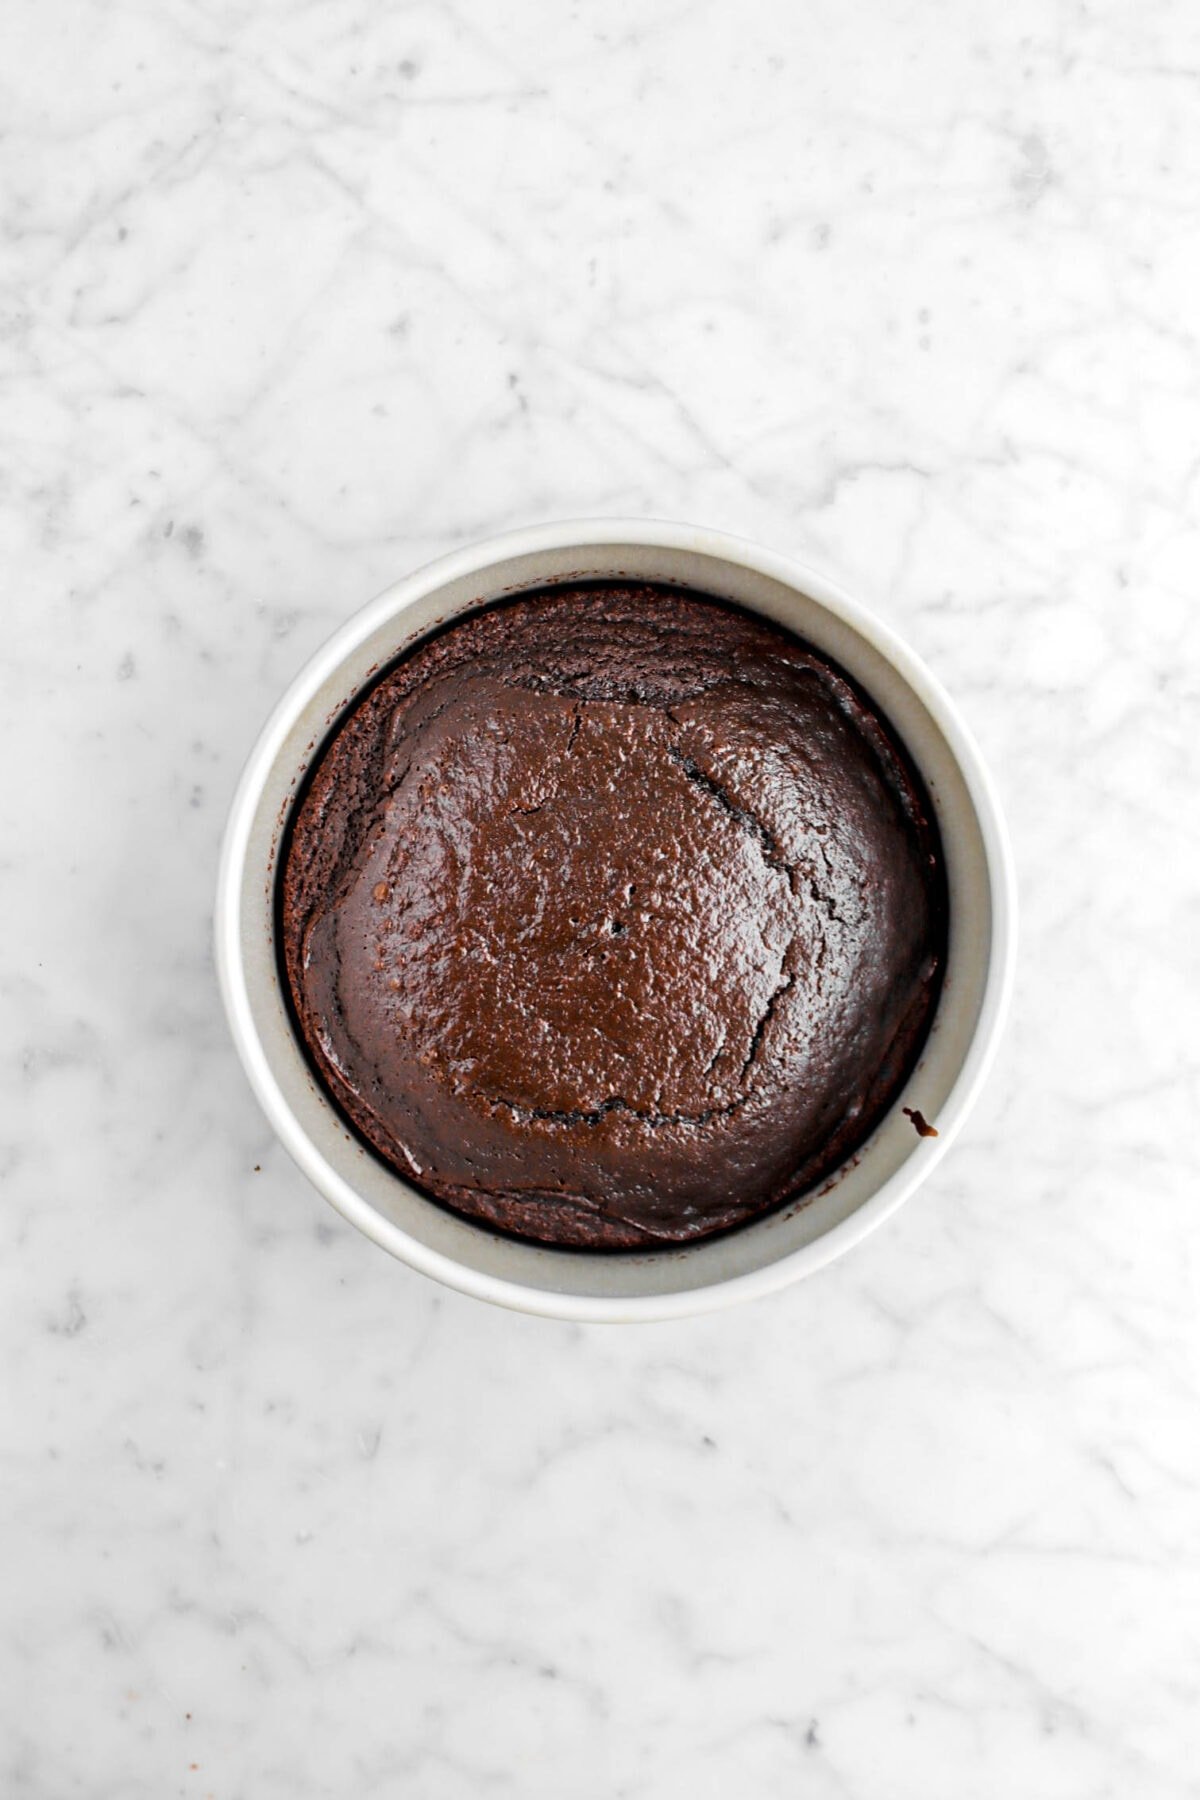 baked chocolate cake in cake pan on marble surface.